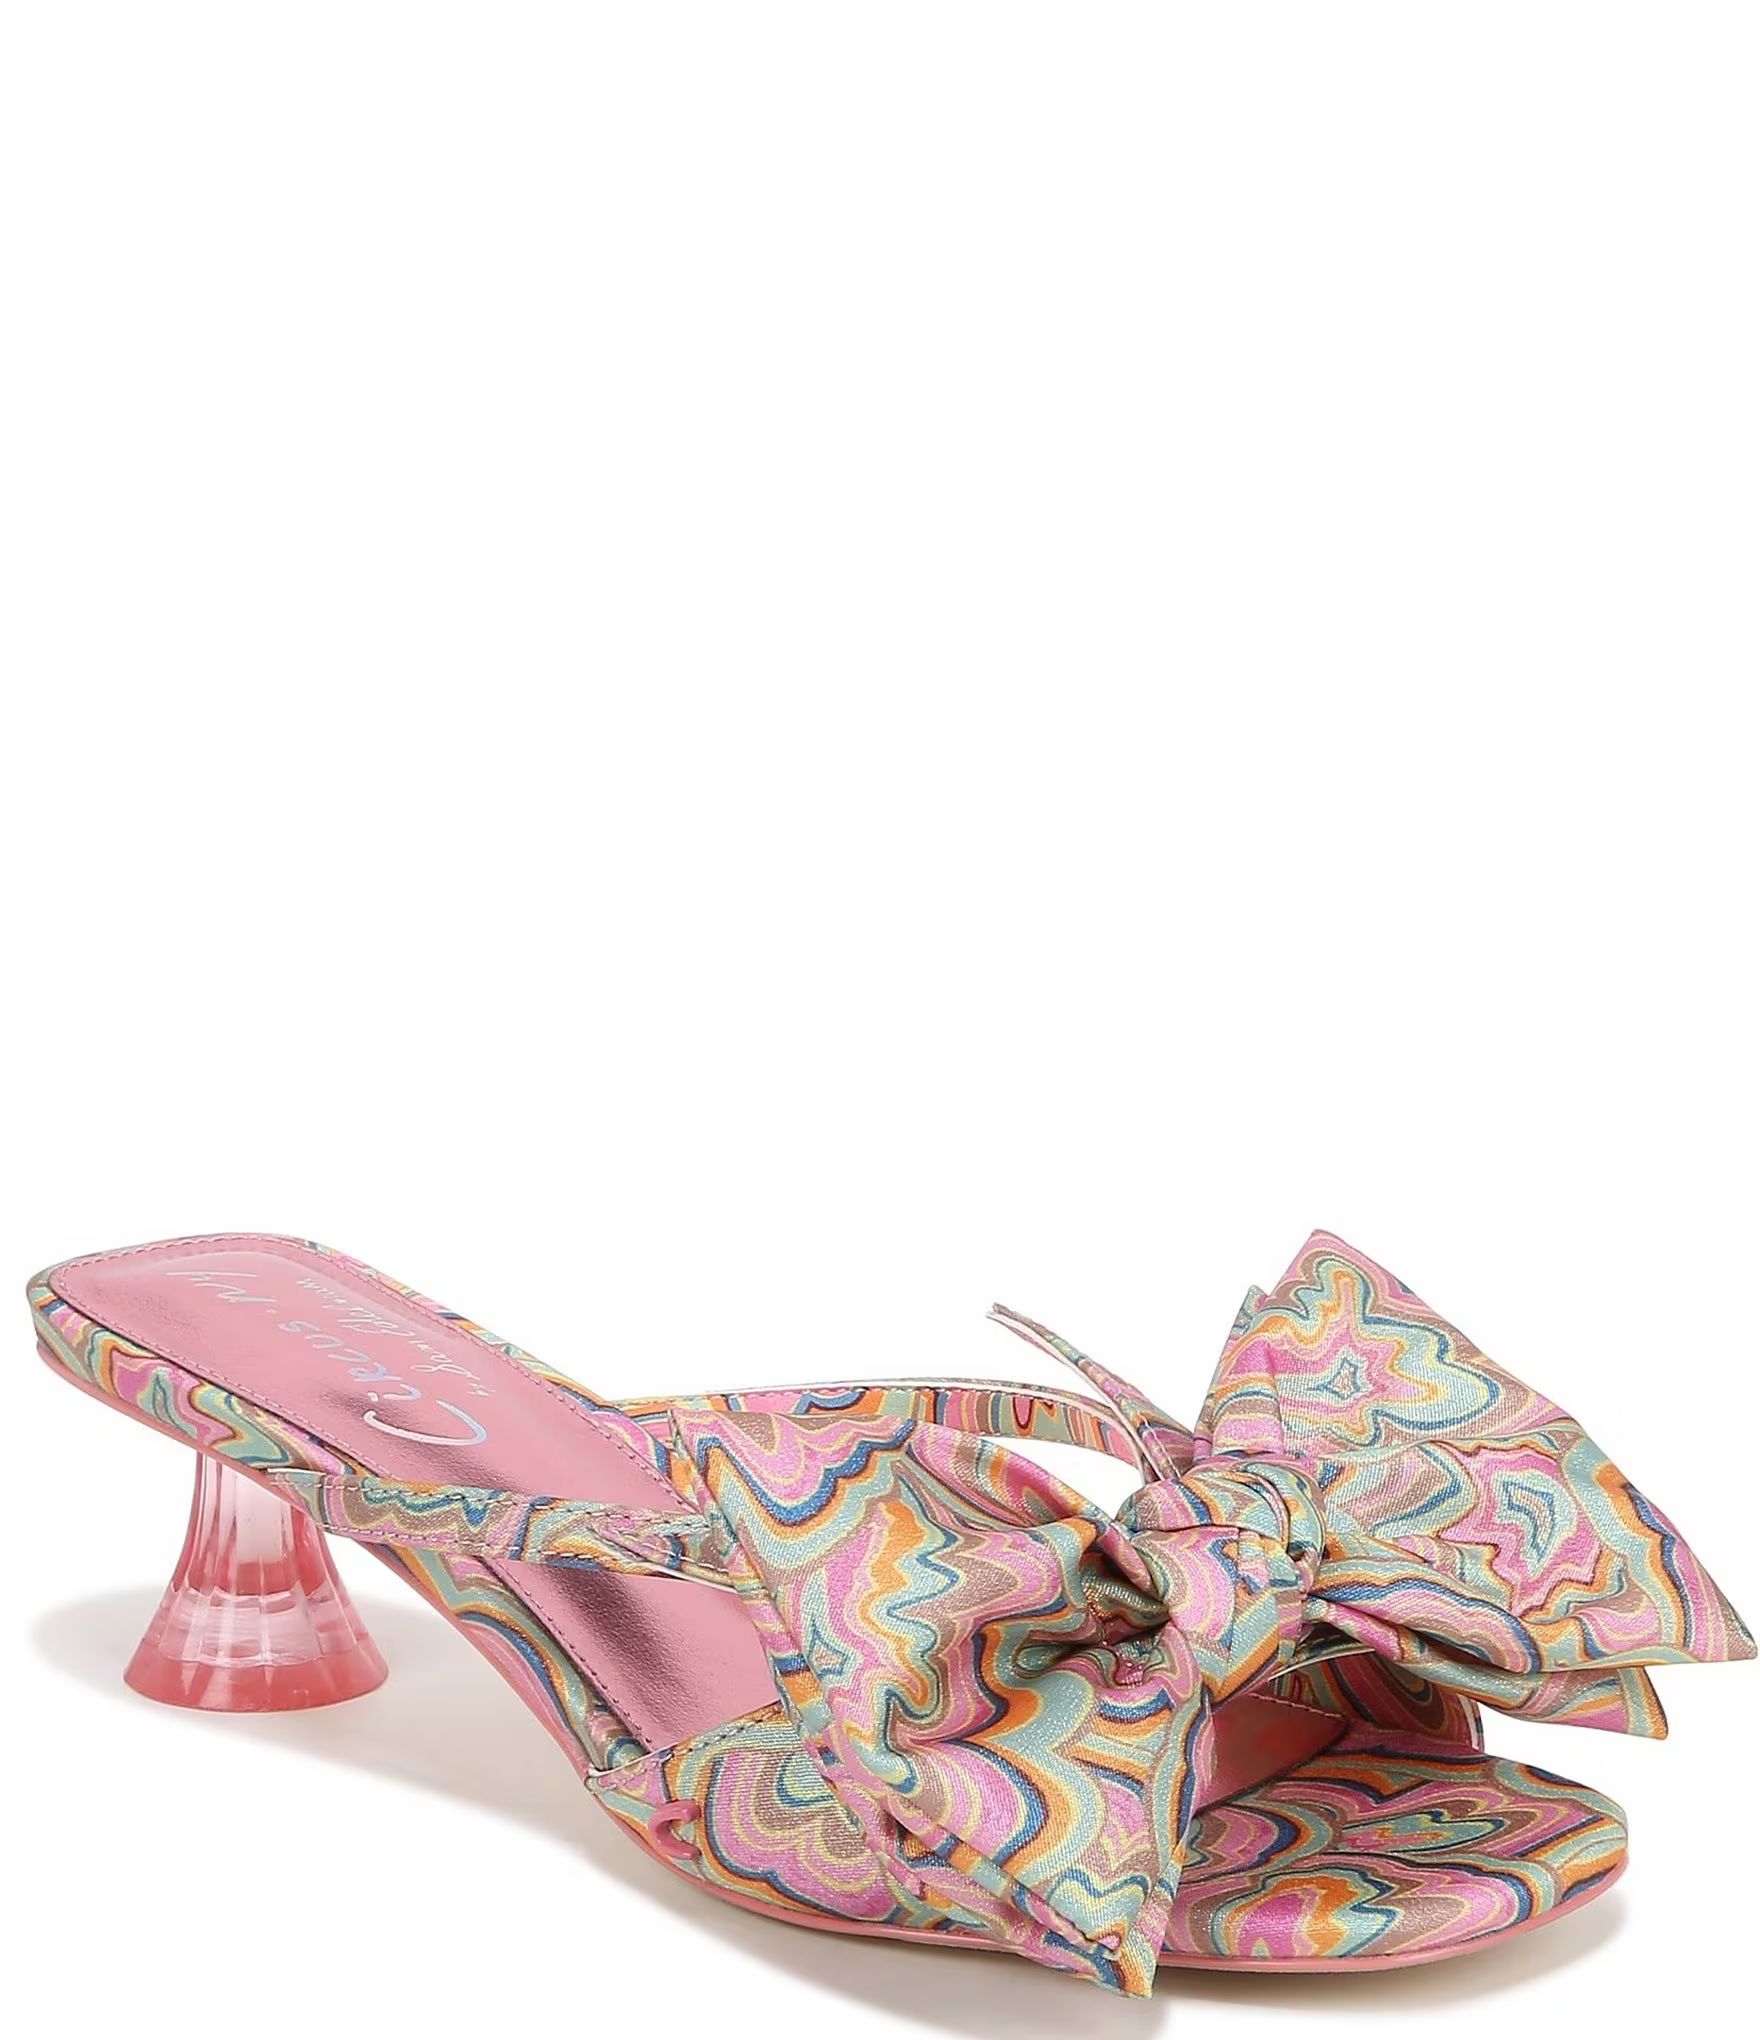 Circus NY by Sam Edelman Natalina Printed Fabric Butterfly Bow Slide Sandals | Dillard's